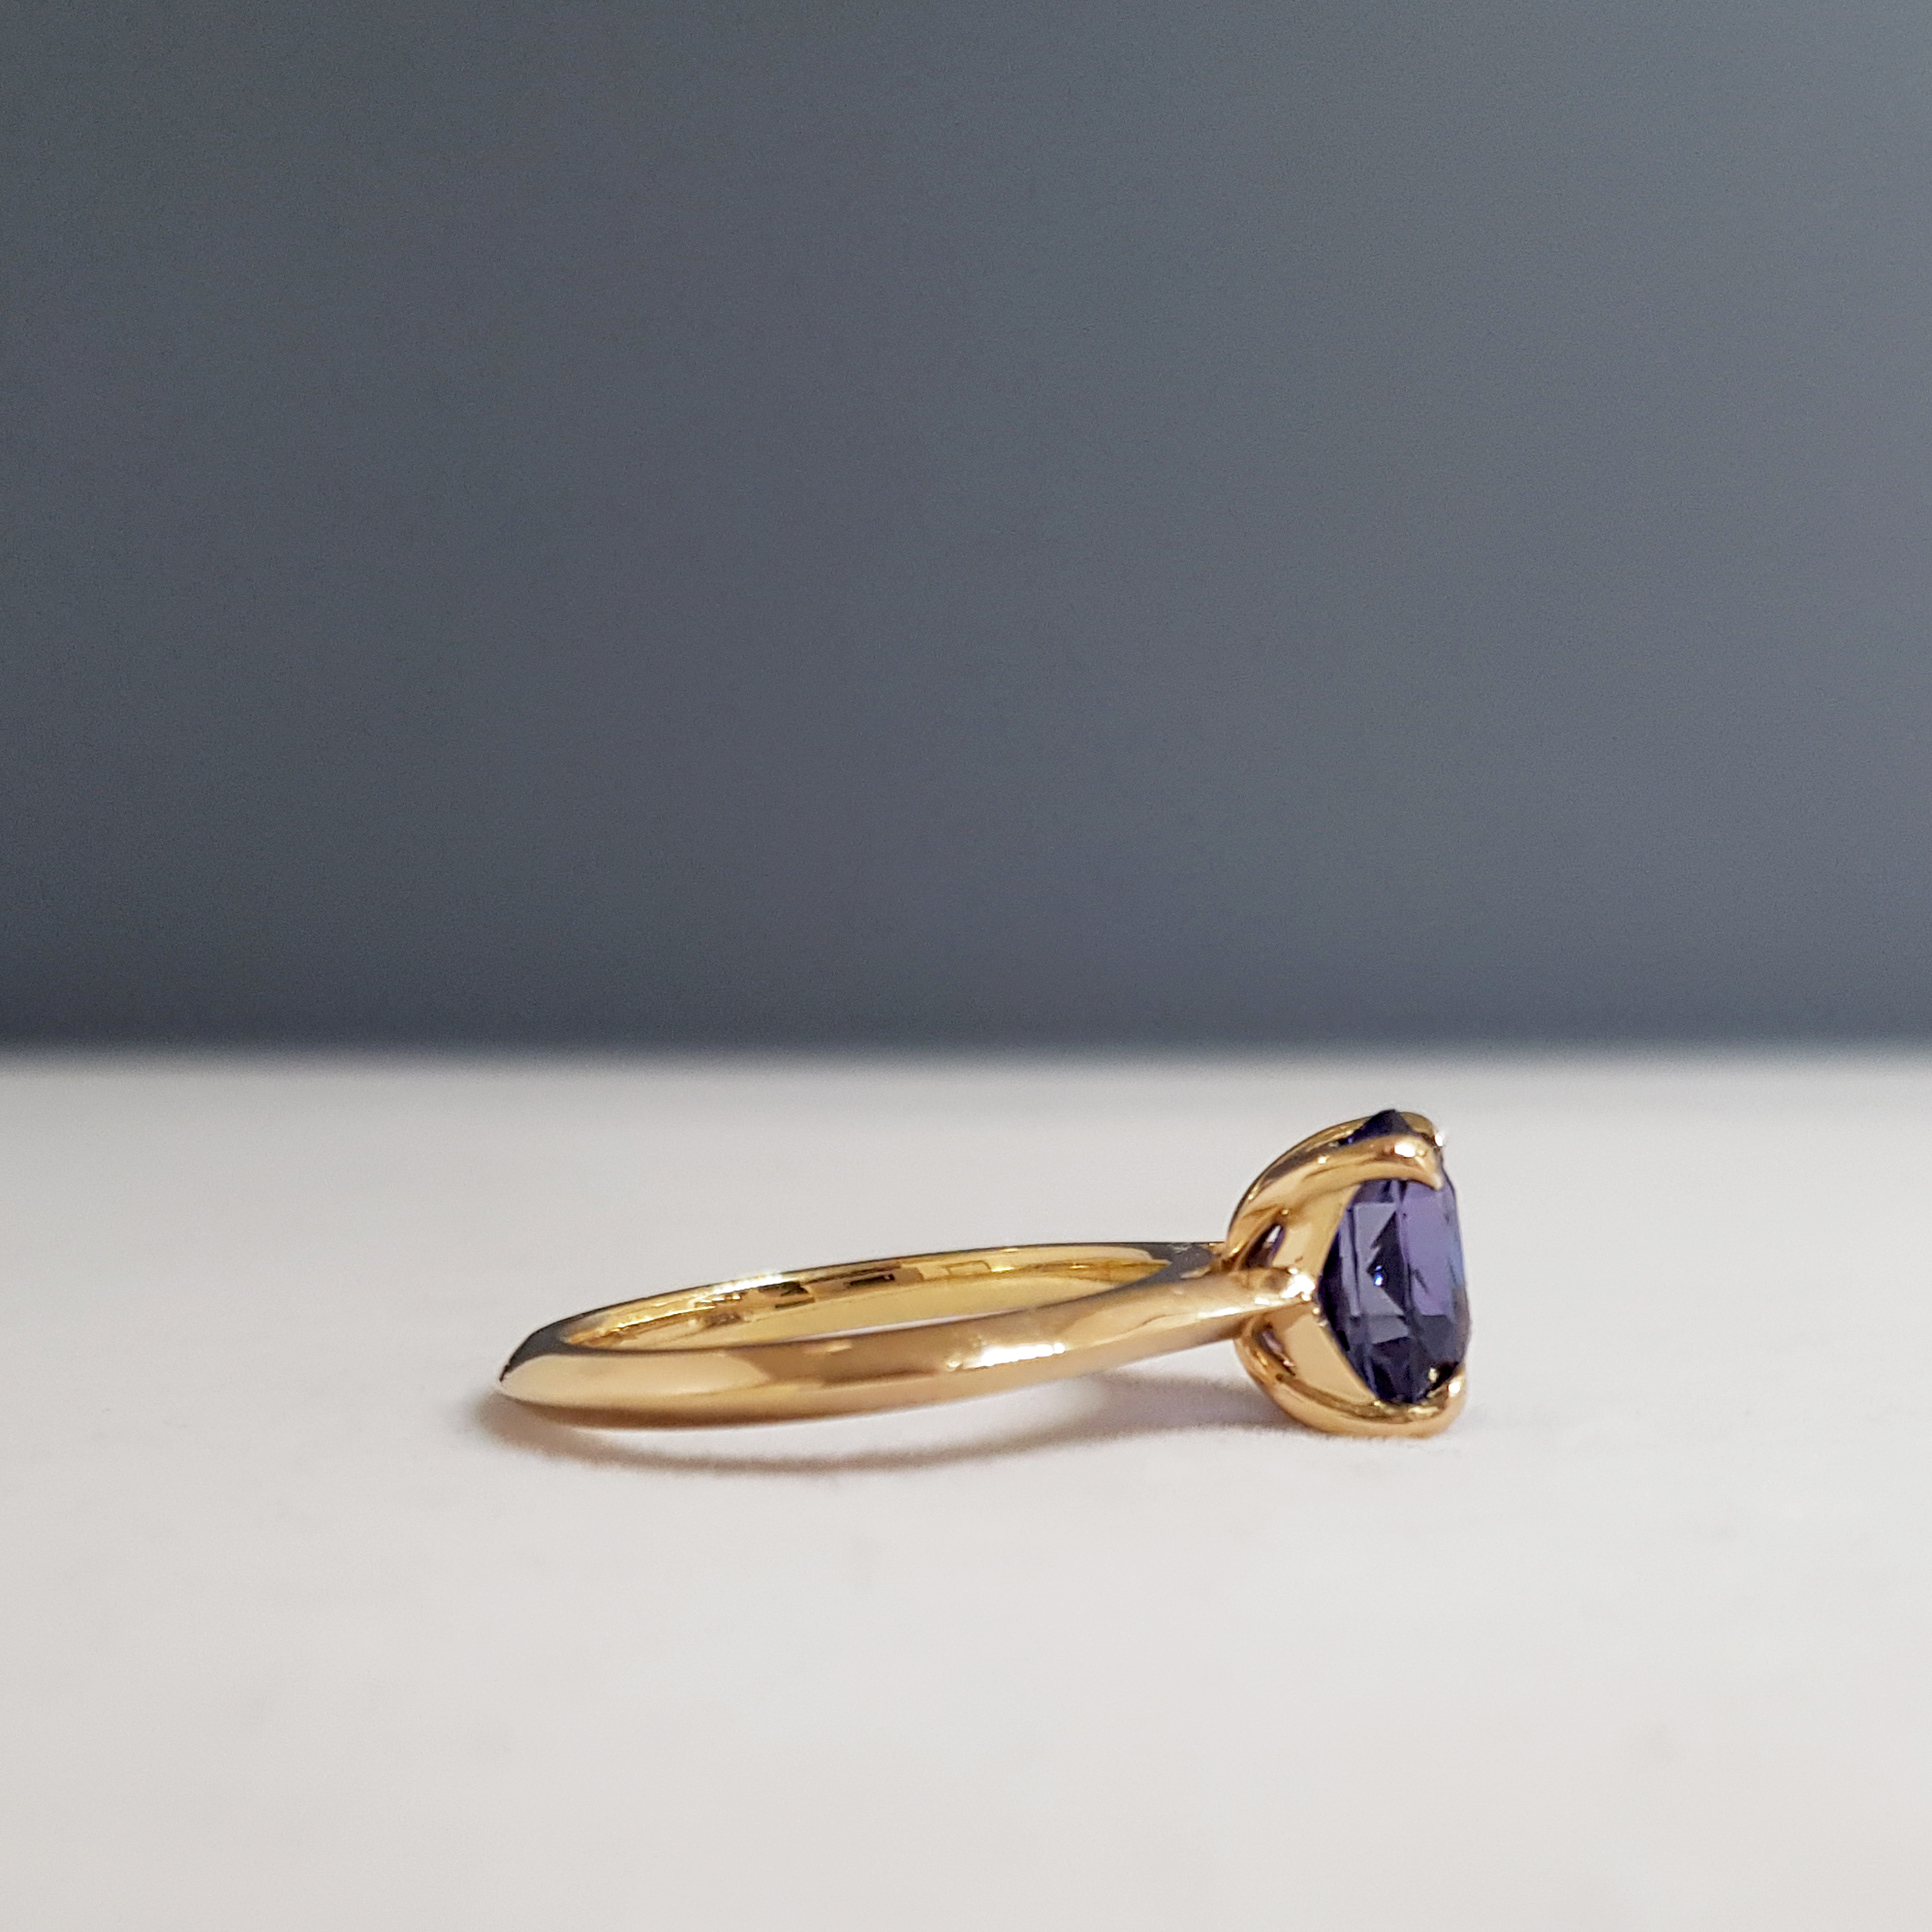 side profile of a solitaire purple sapphire egagement ring with a gold band on a grey background